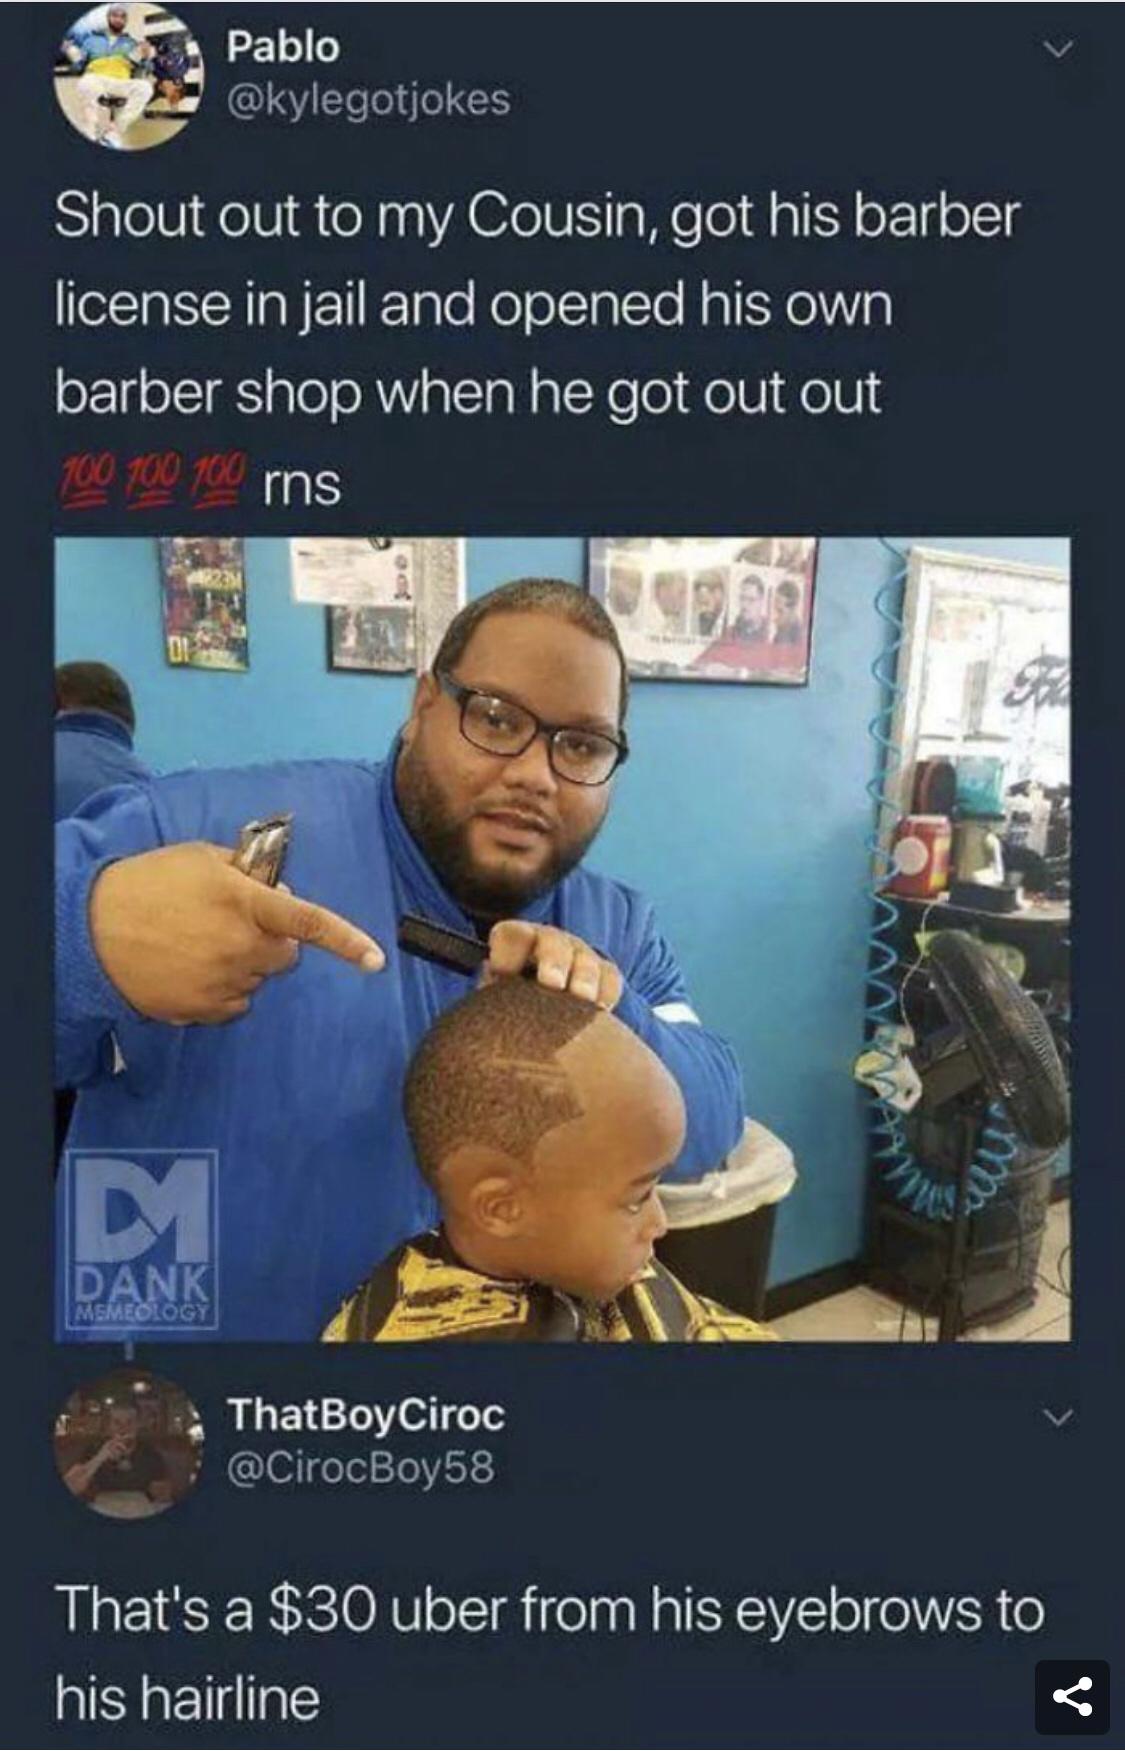 tay keith fuck these niggas up - Pablo Shout out to my Cousin, got his barber license in jail and opened his own barber shop when he got out out 100 100 100 rns n mes Dank Memeology ThatBoyCiroc That's a $30 uber from his eyebrows to his hairline